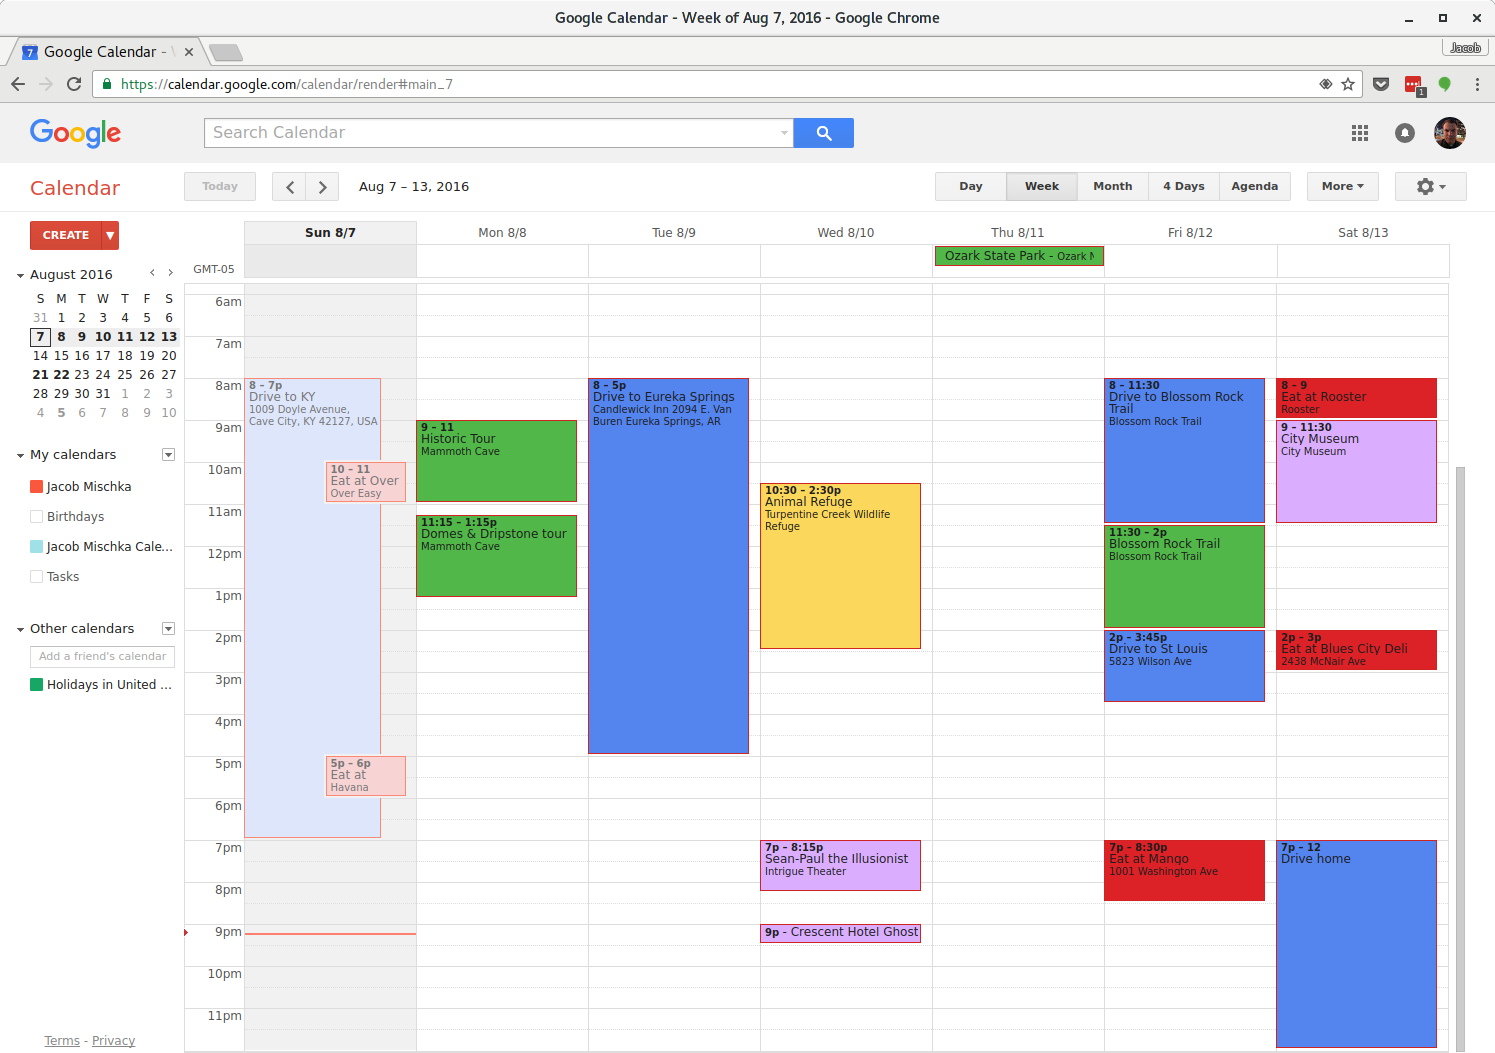 Calendar view of trip itinerary